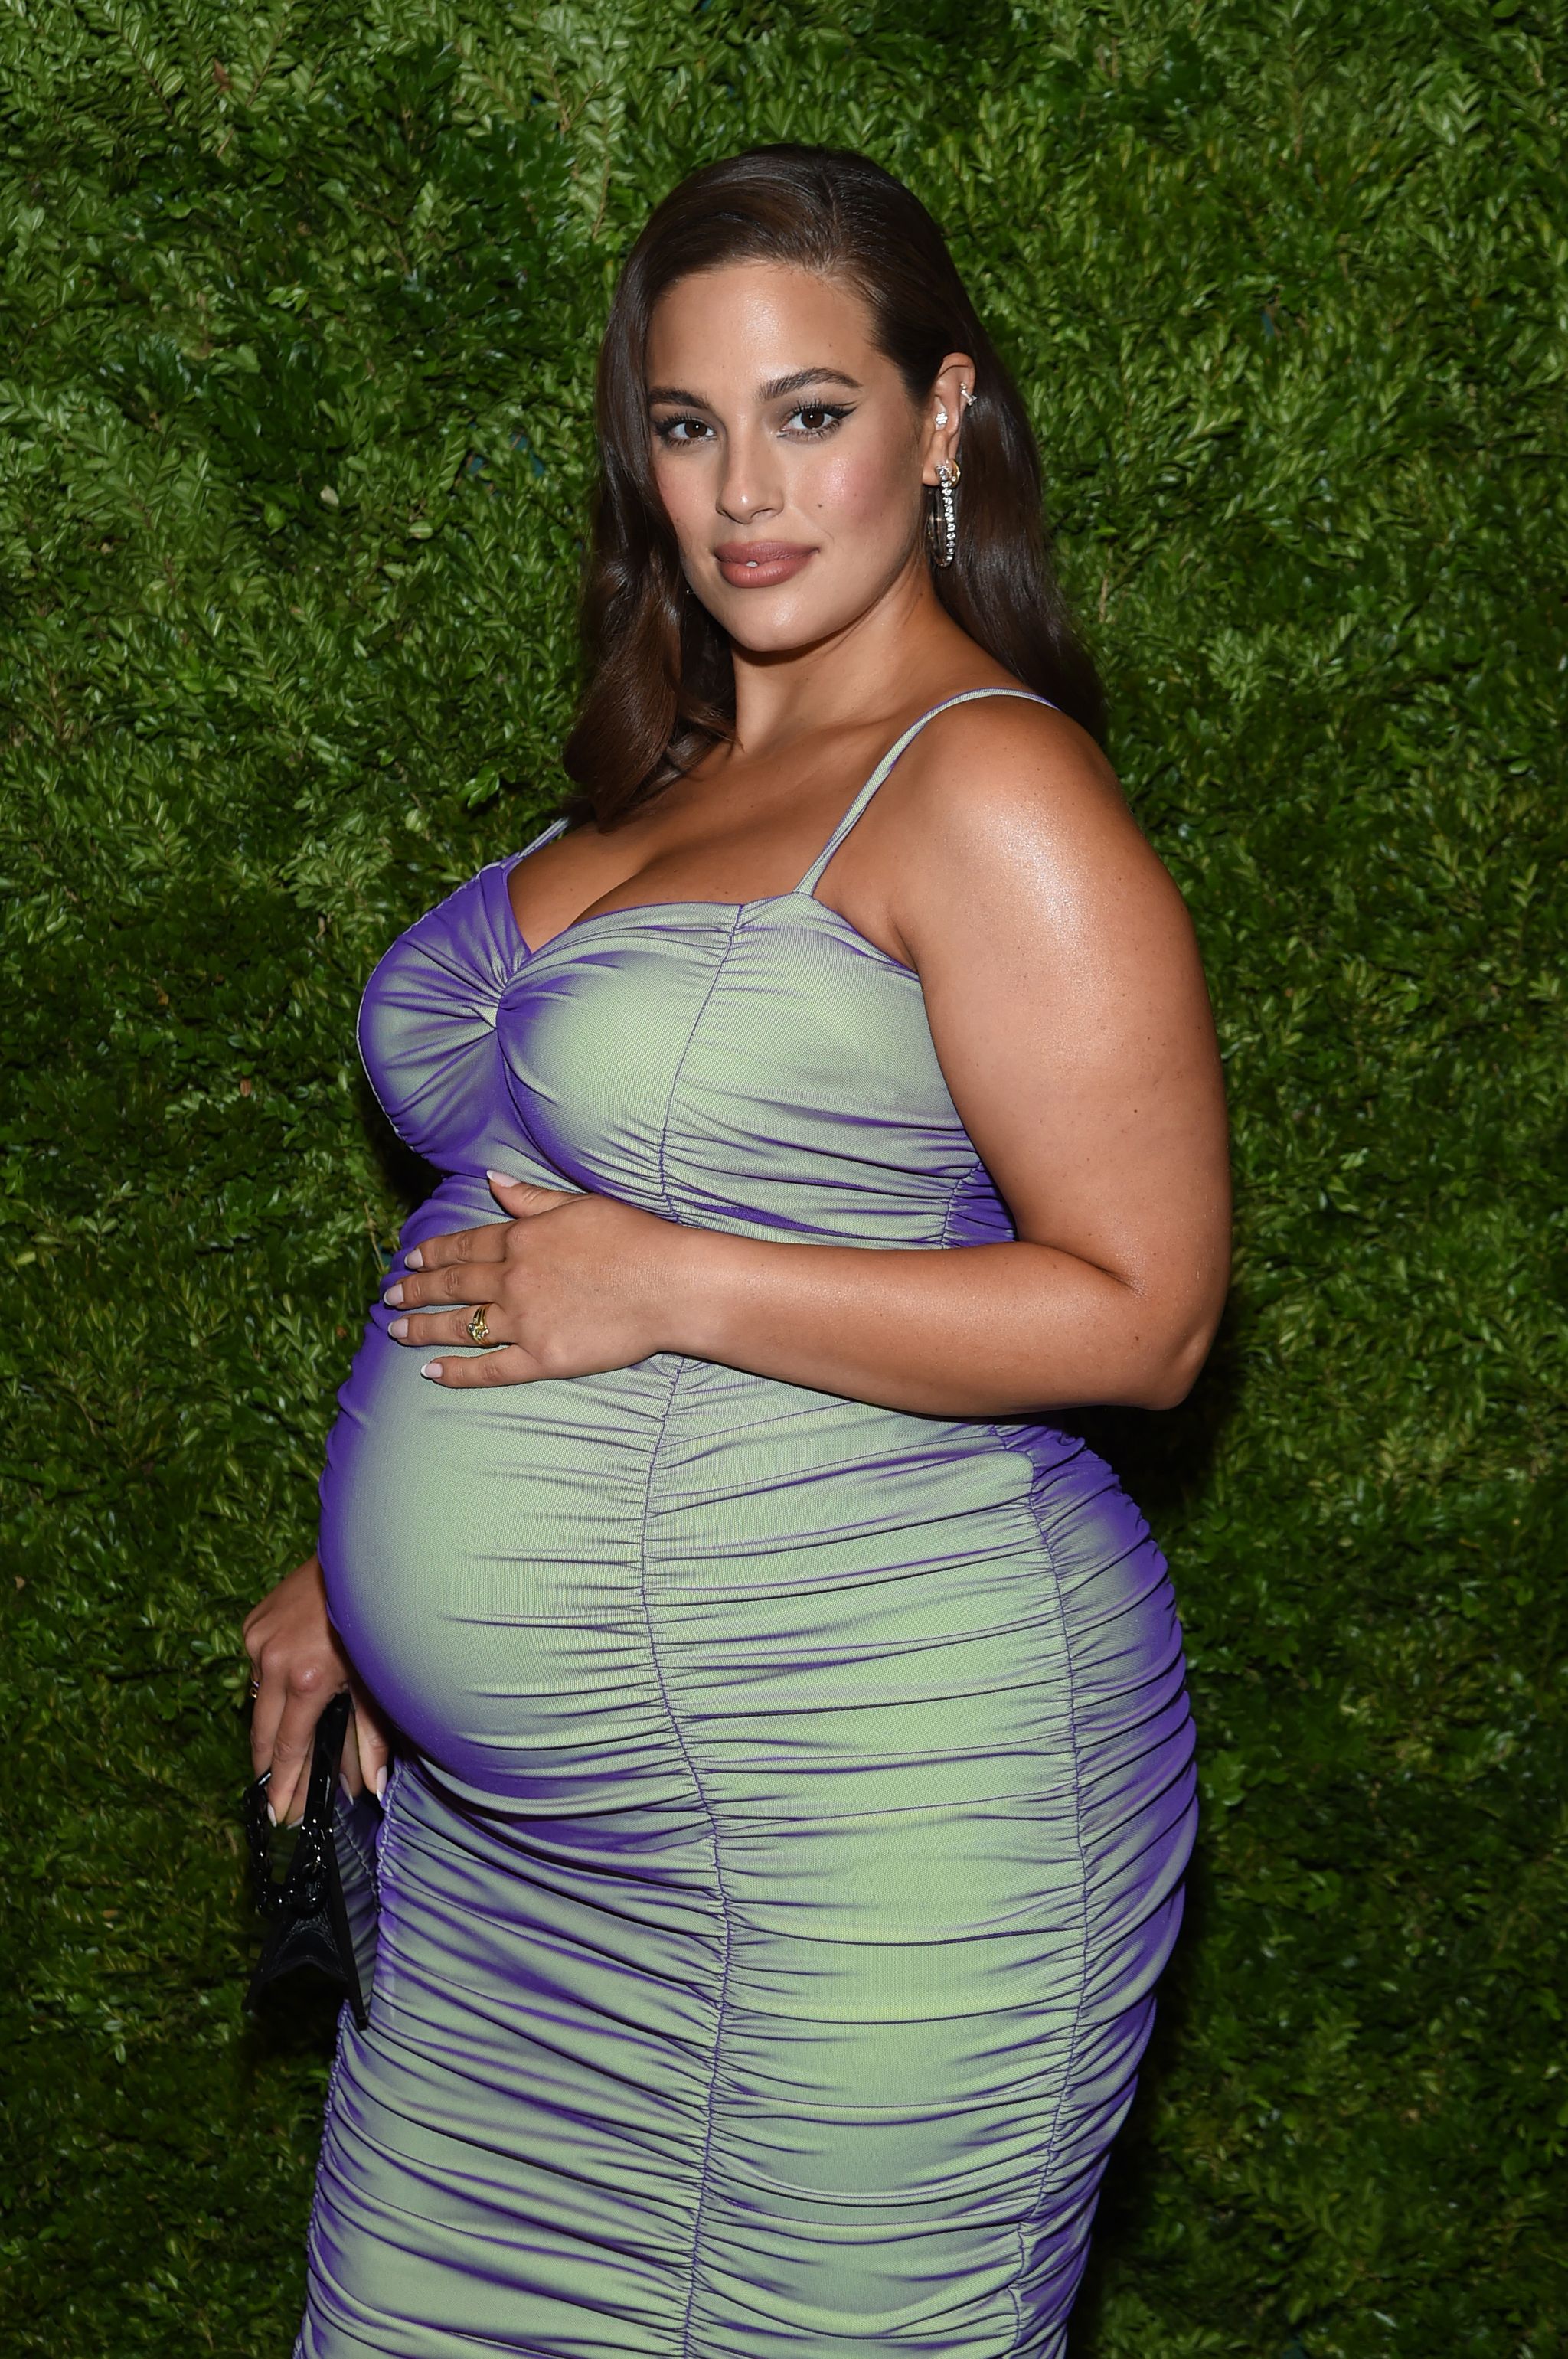 https://hips.hearstapps.com/hmg-prod/images/ashley-graham-attends-the-cfda-vogue-fashion-fund-2019-news-photo-1581500448.jpg?resize=2048:*